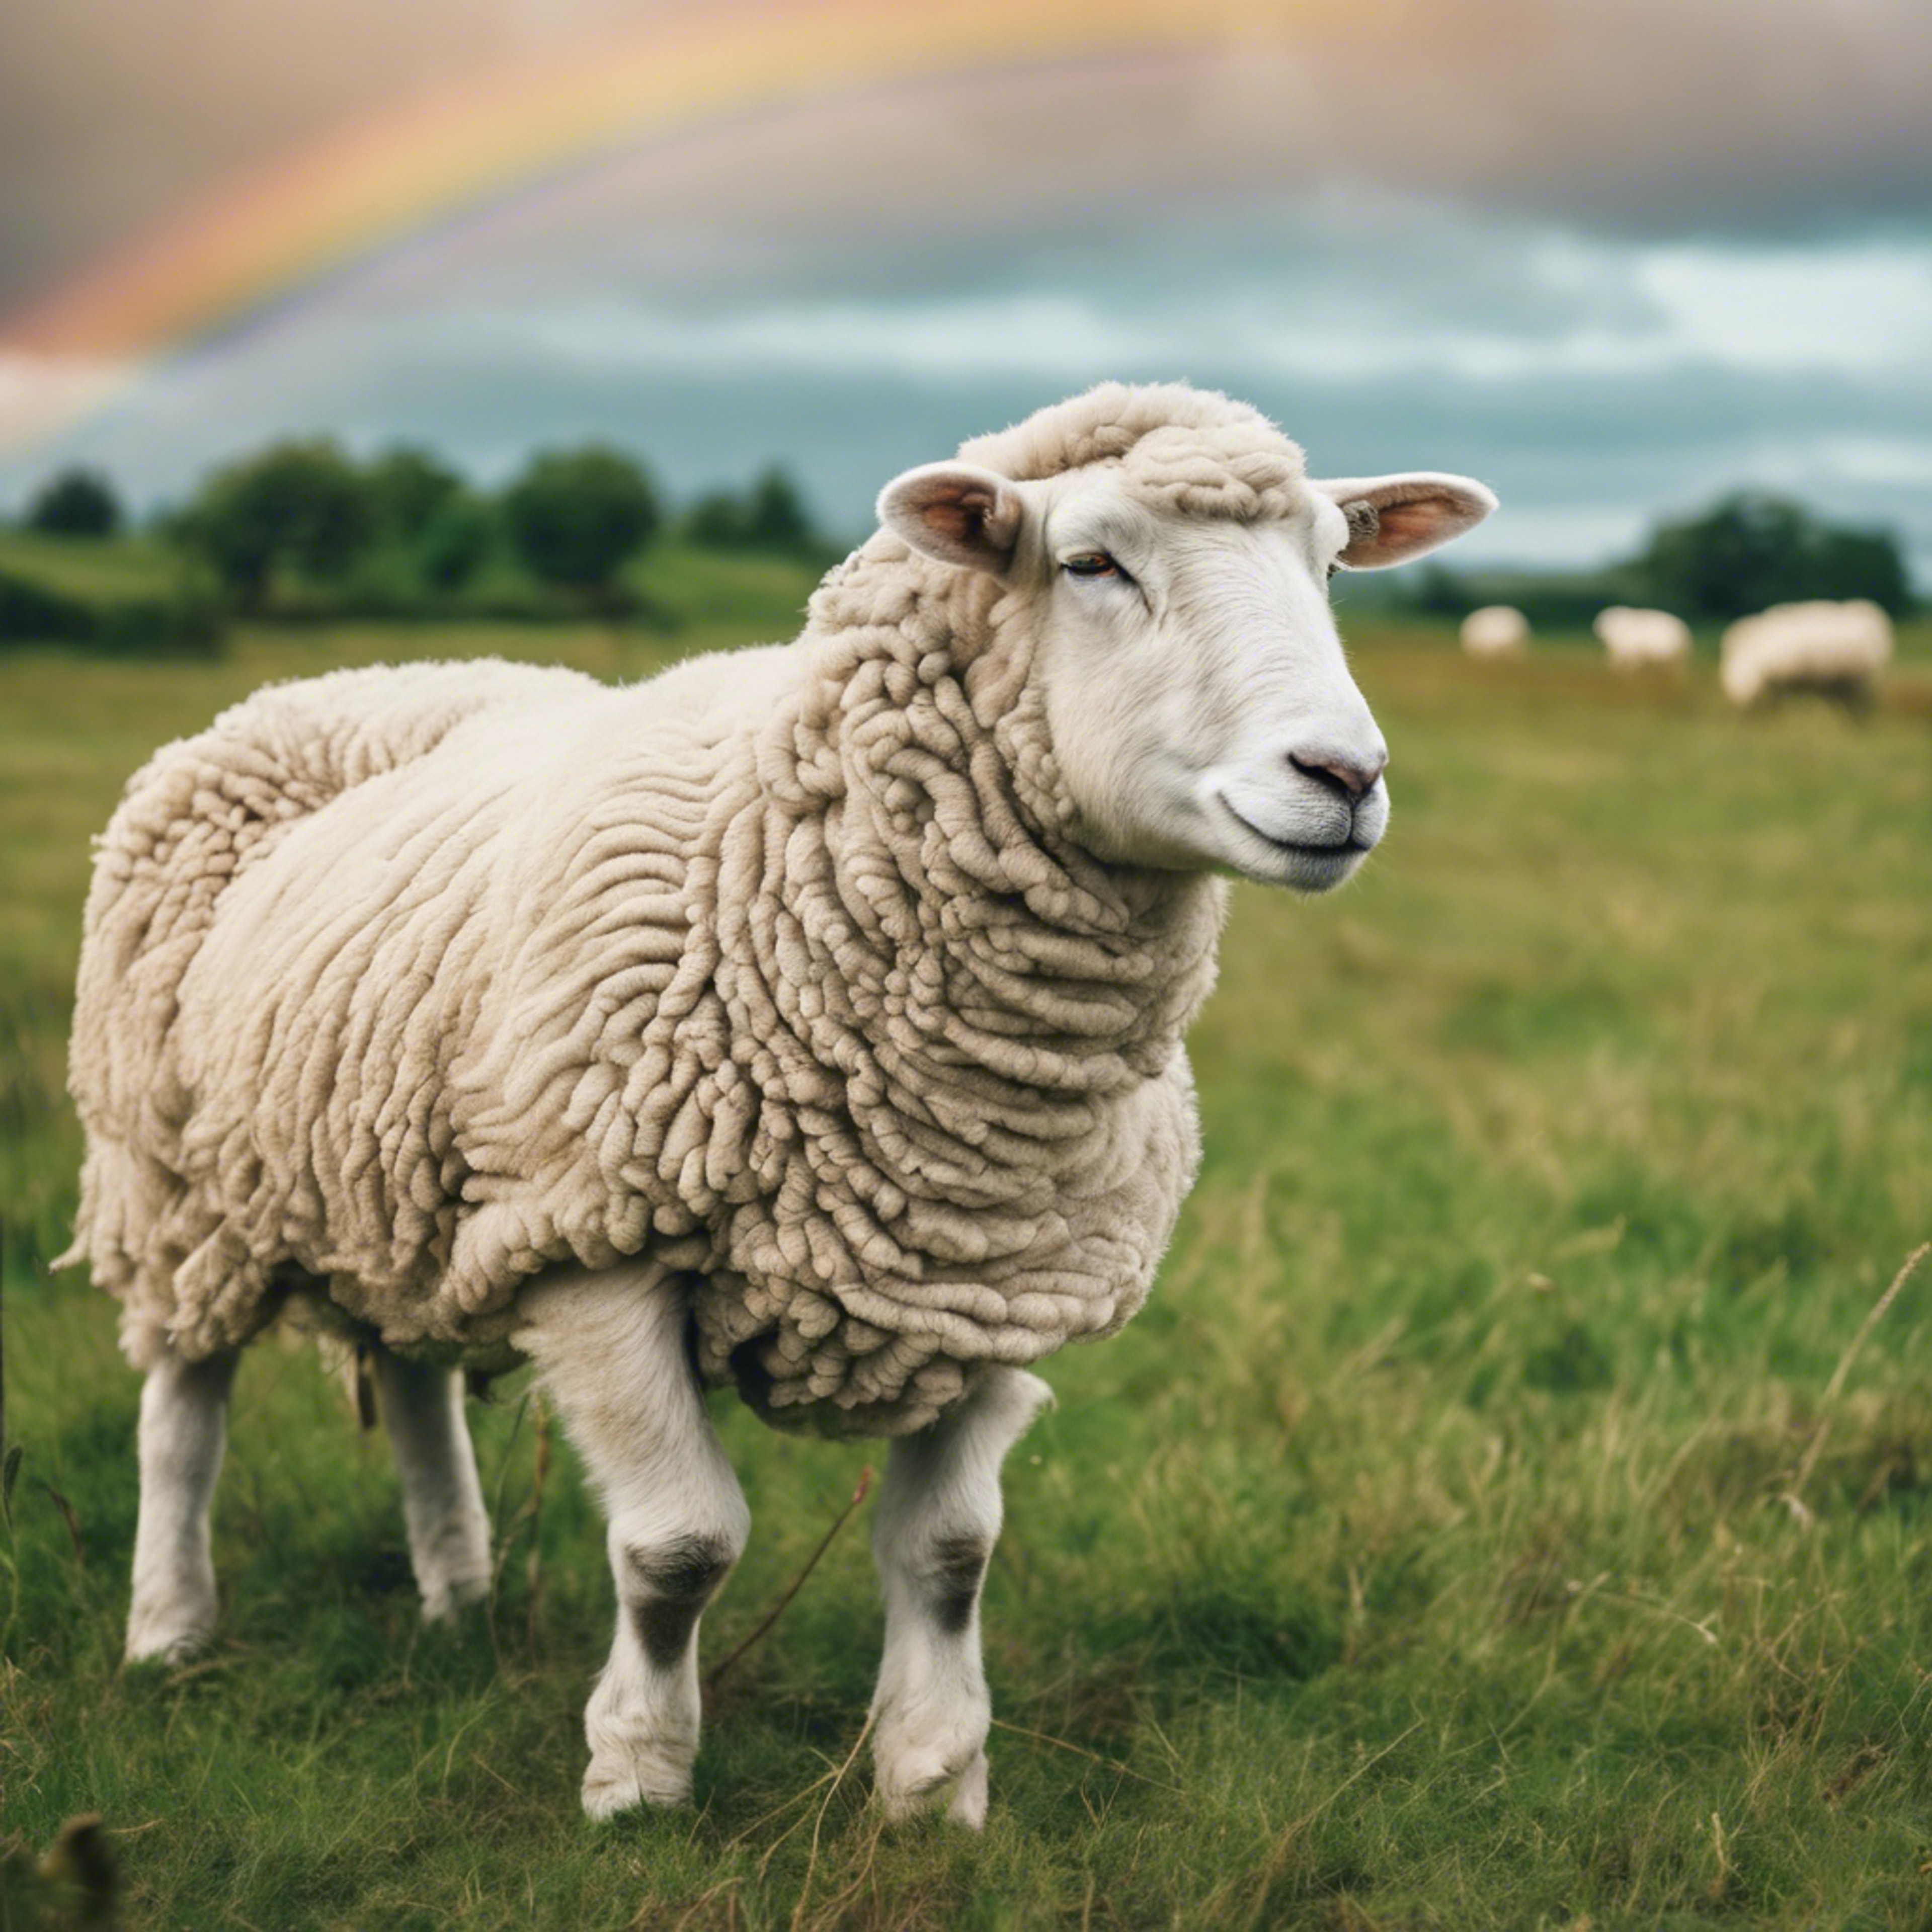 A beautiful open field of grass with puffy white cloud sheep that create rainbow trails as they bound joyfully around. Tapeta[bc005b864b354d3896db]